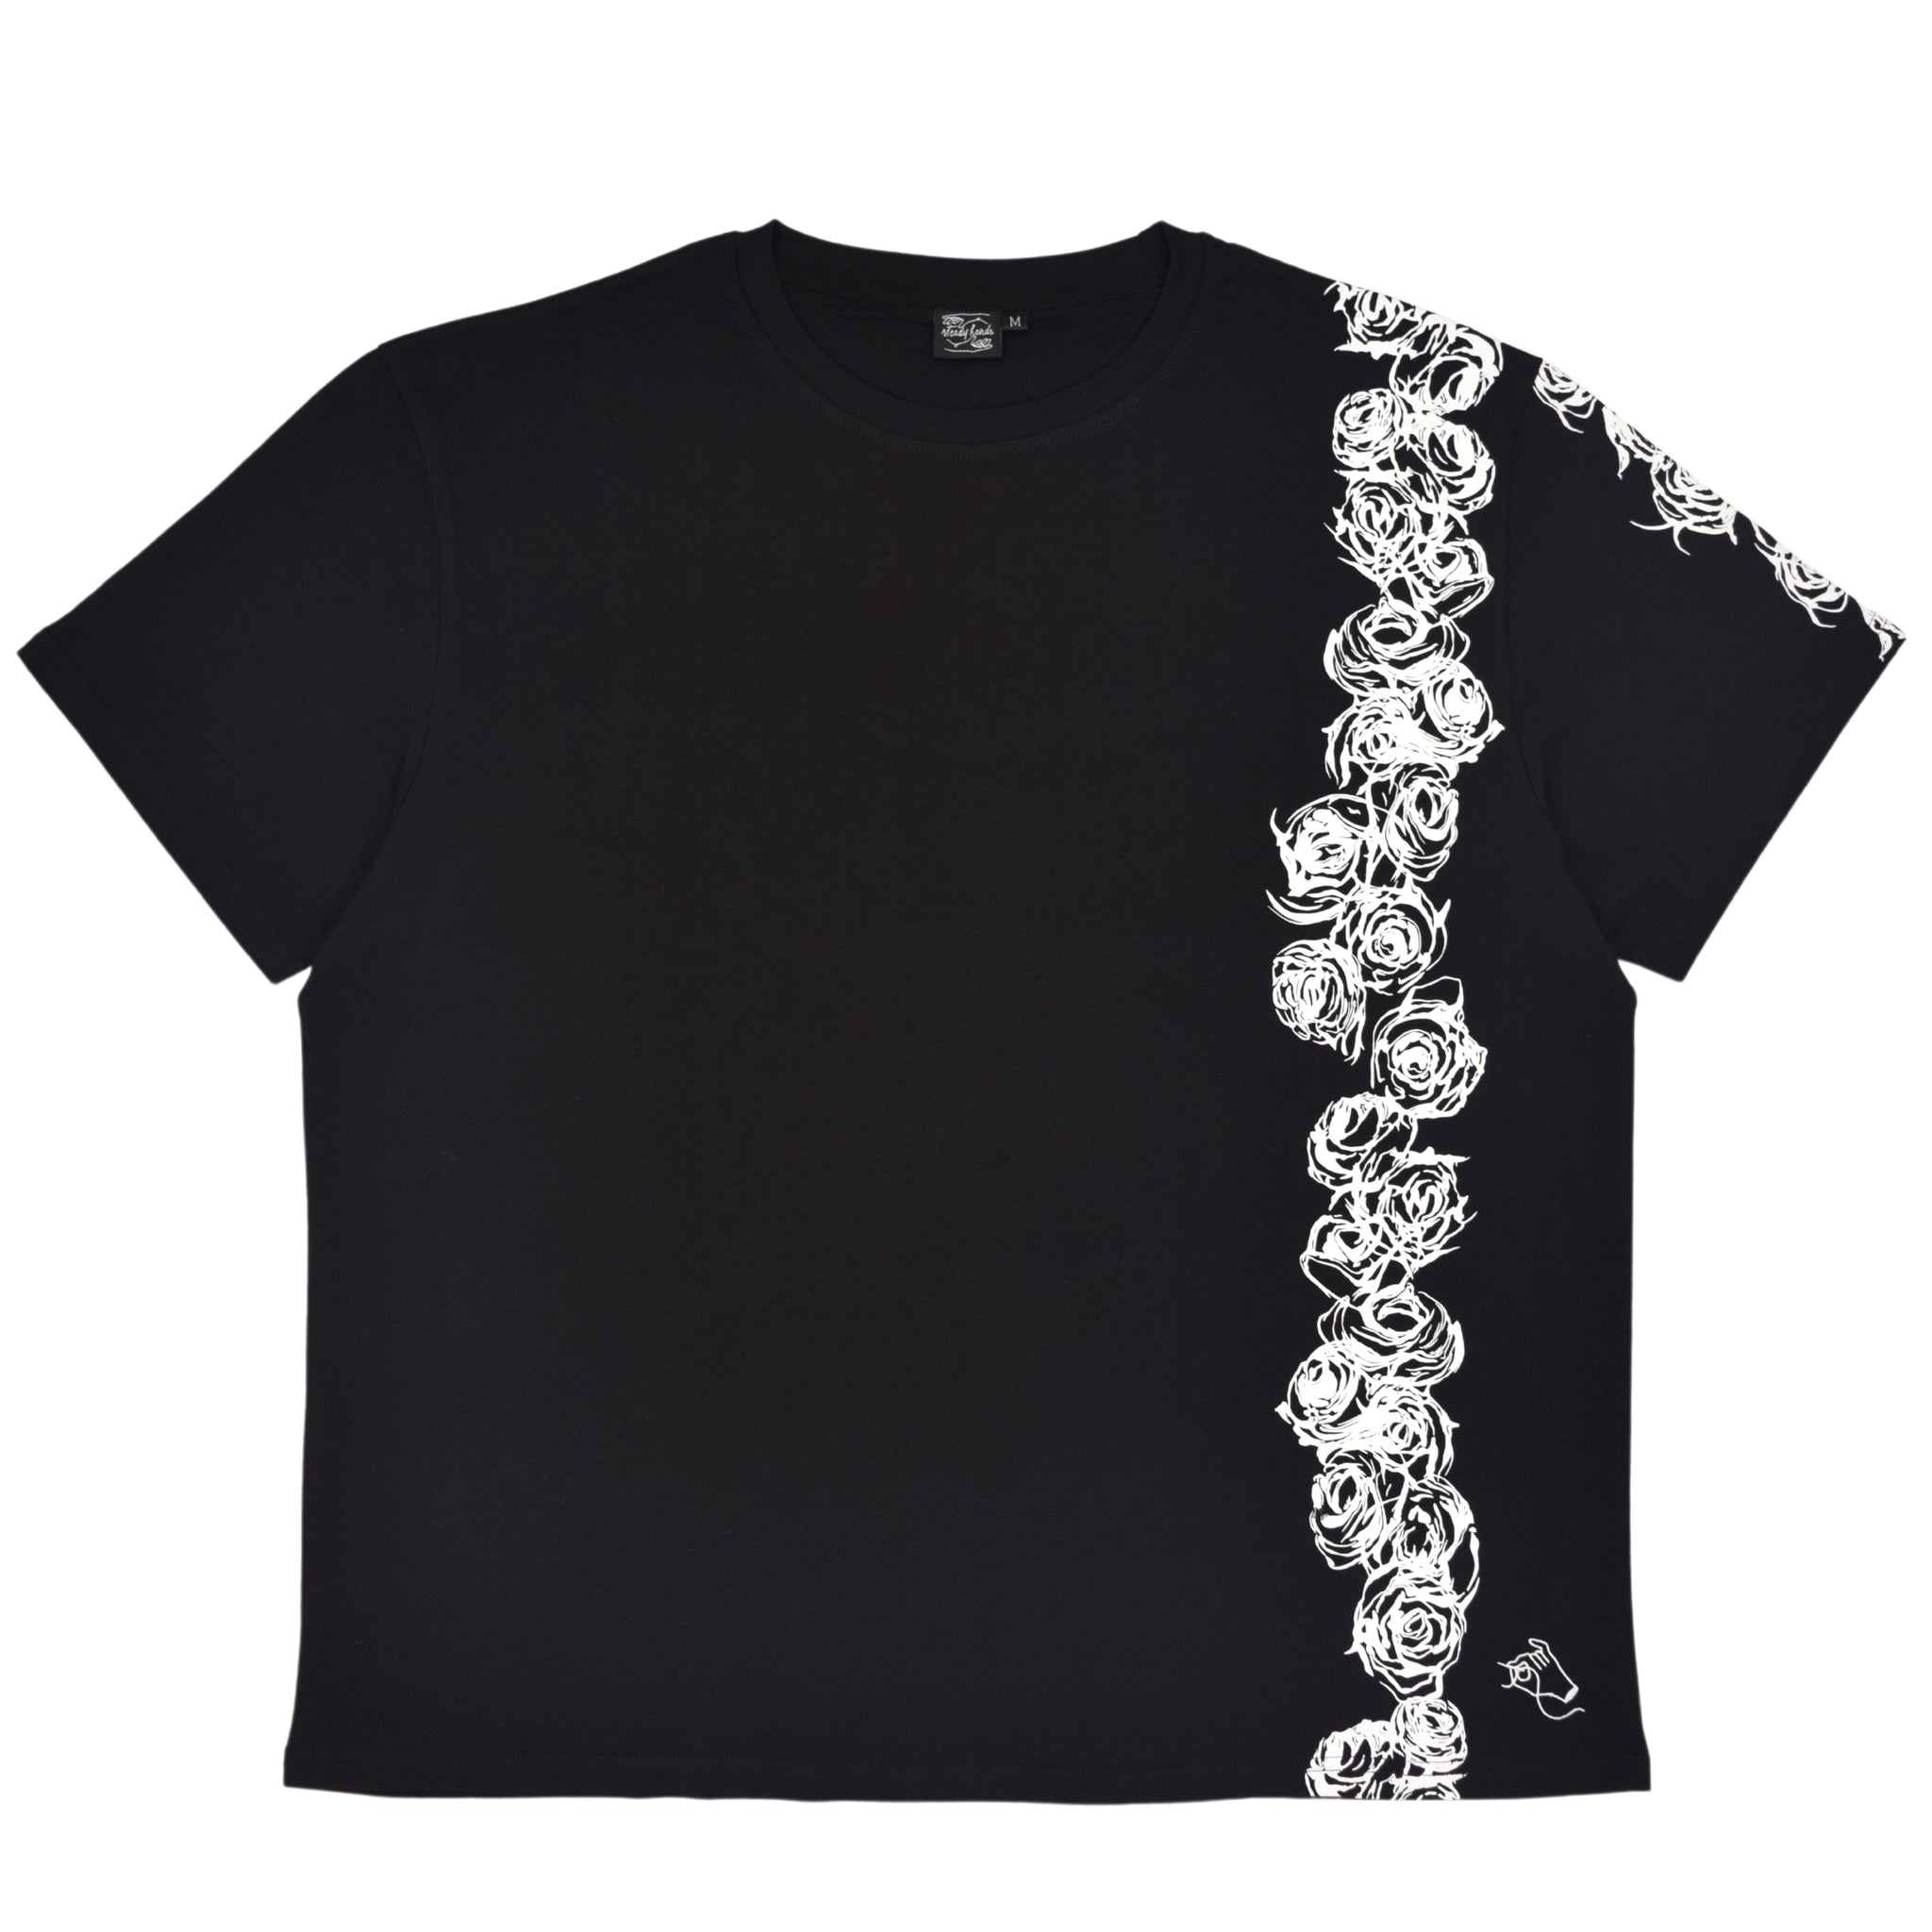 – Hands Decay Tee Steady